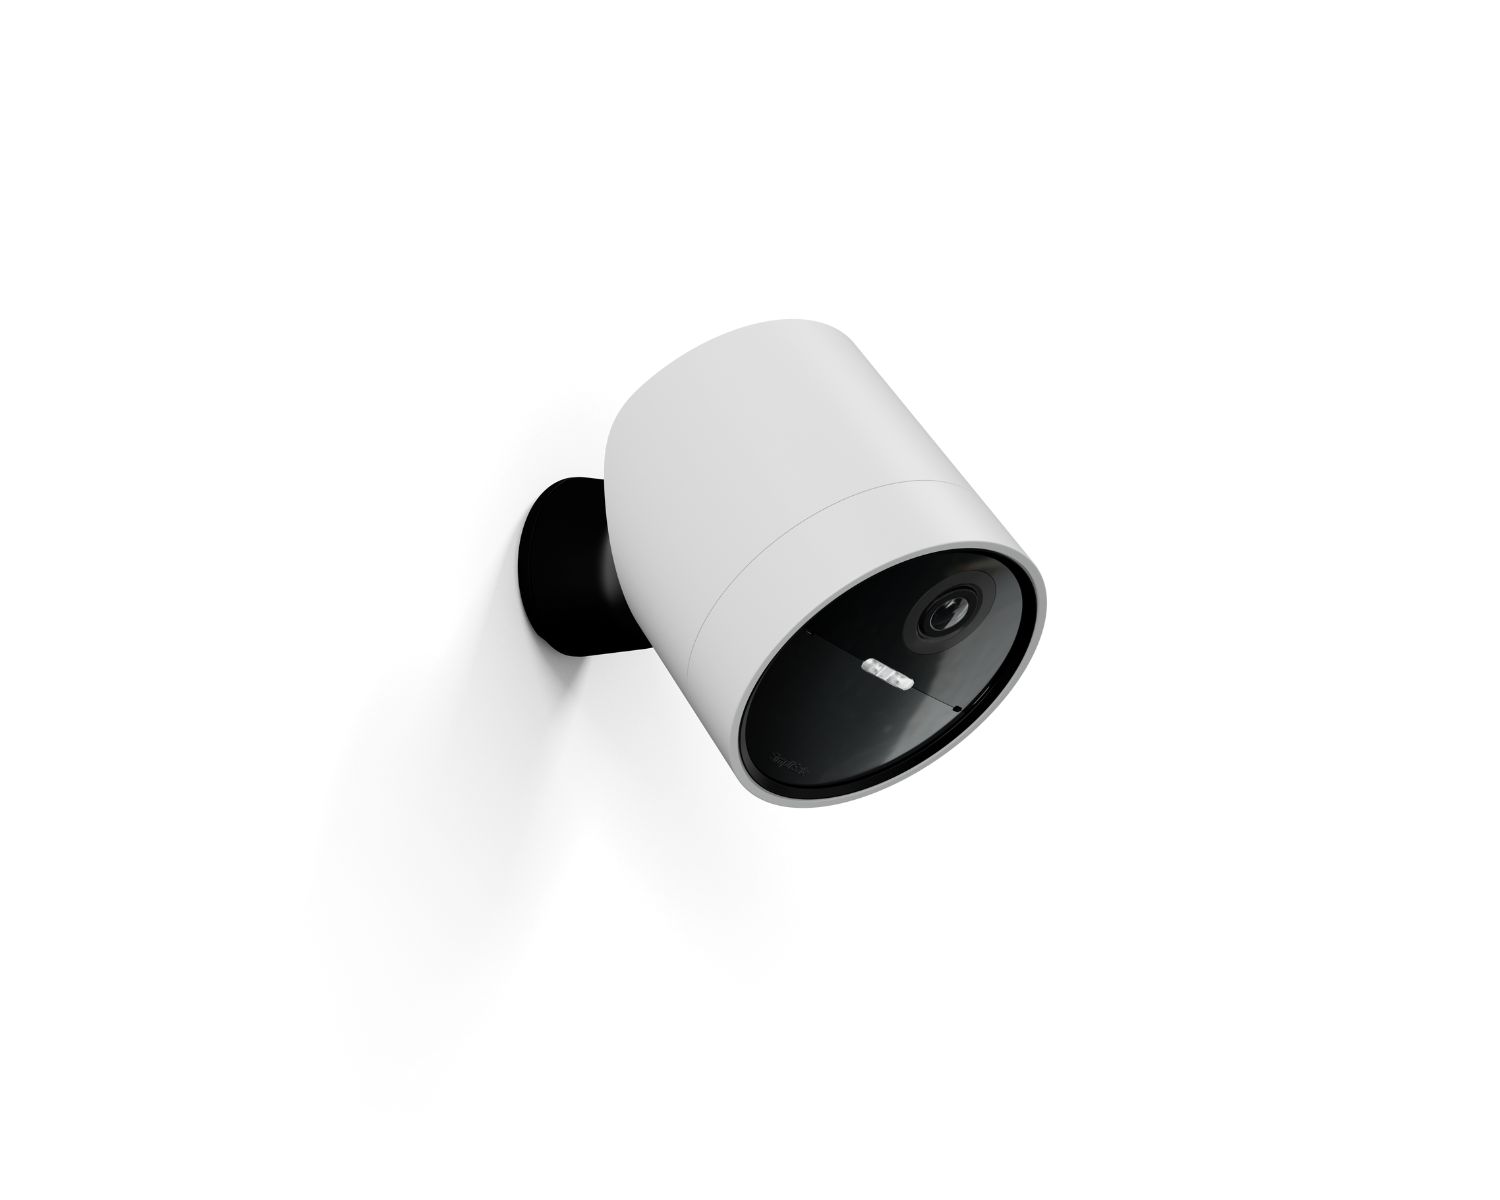 How Long Does The Battery Last On Simplisafe Outdoor Camera